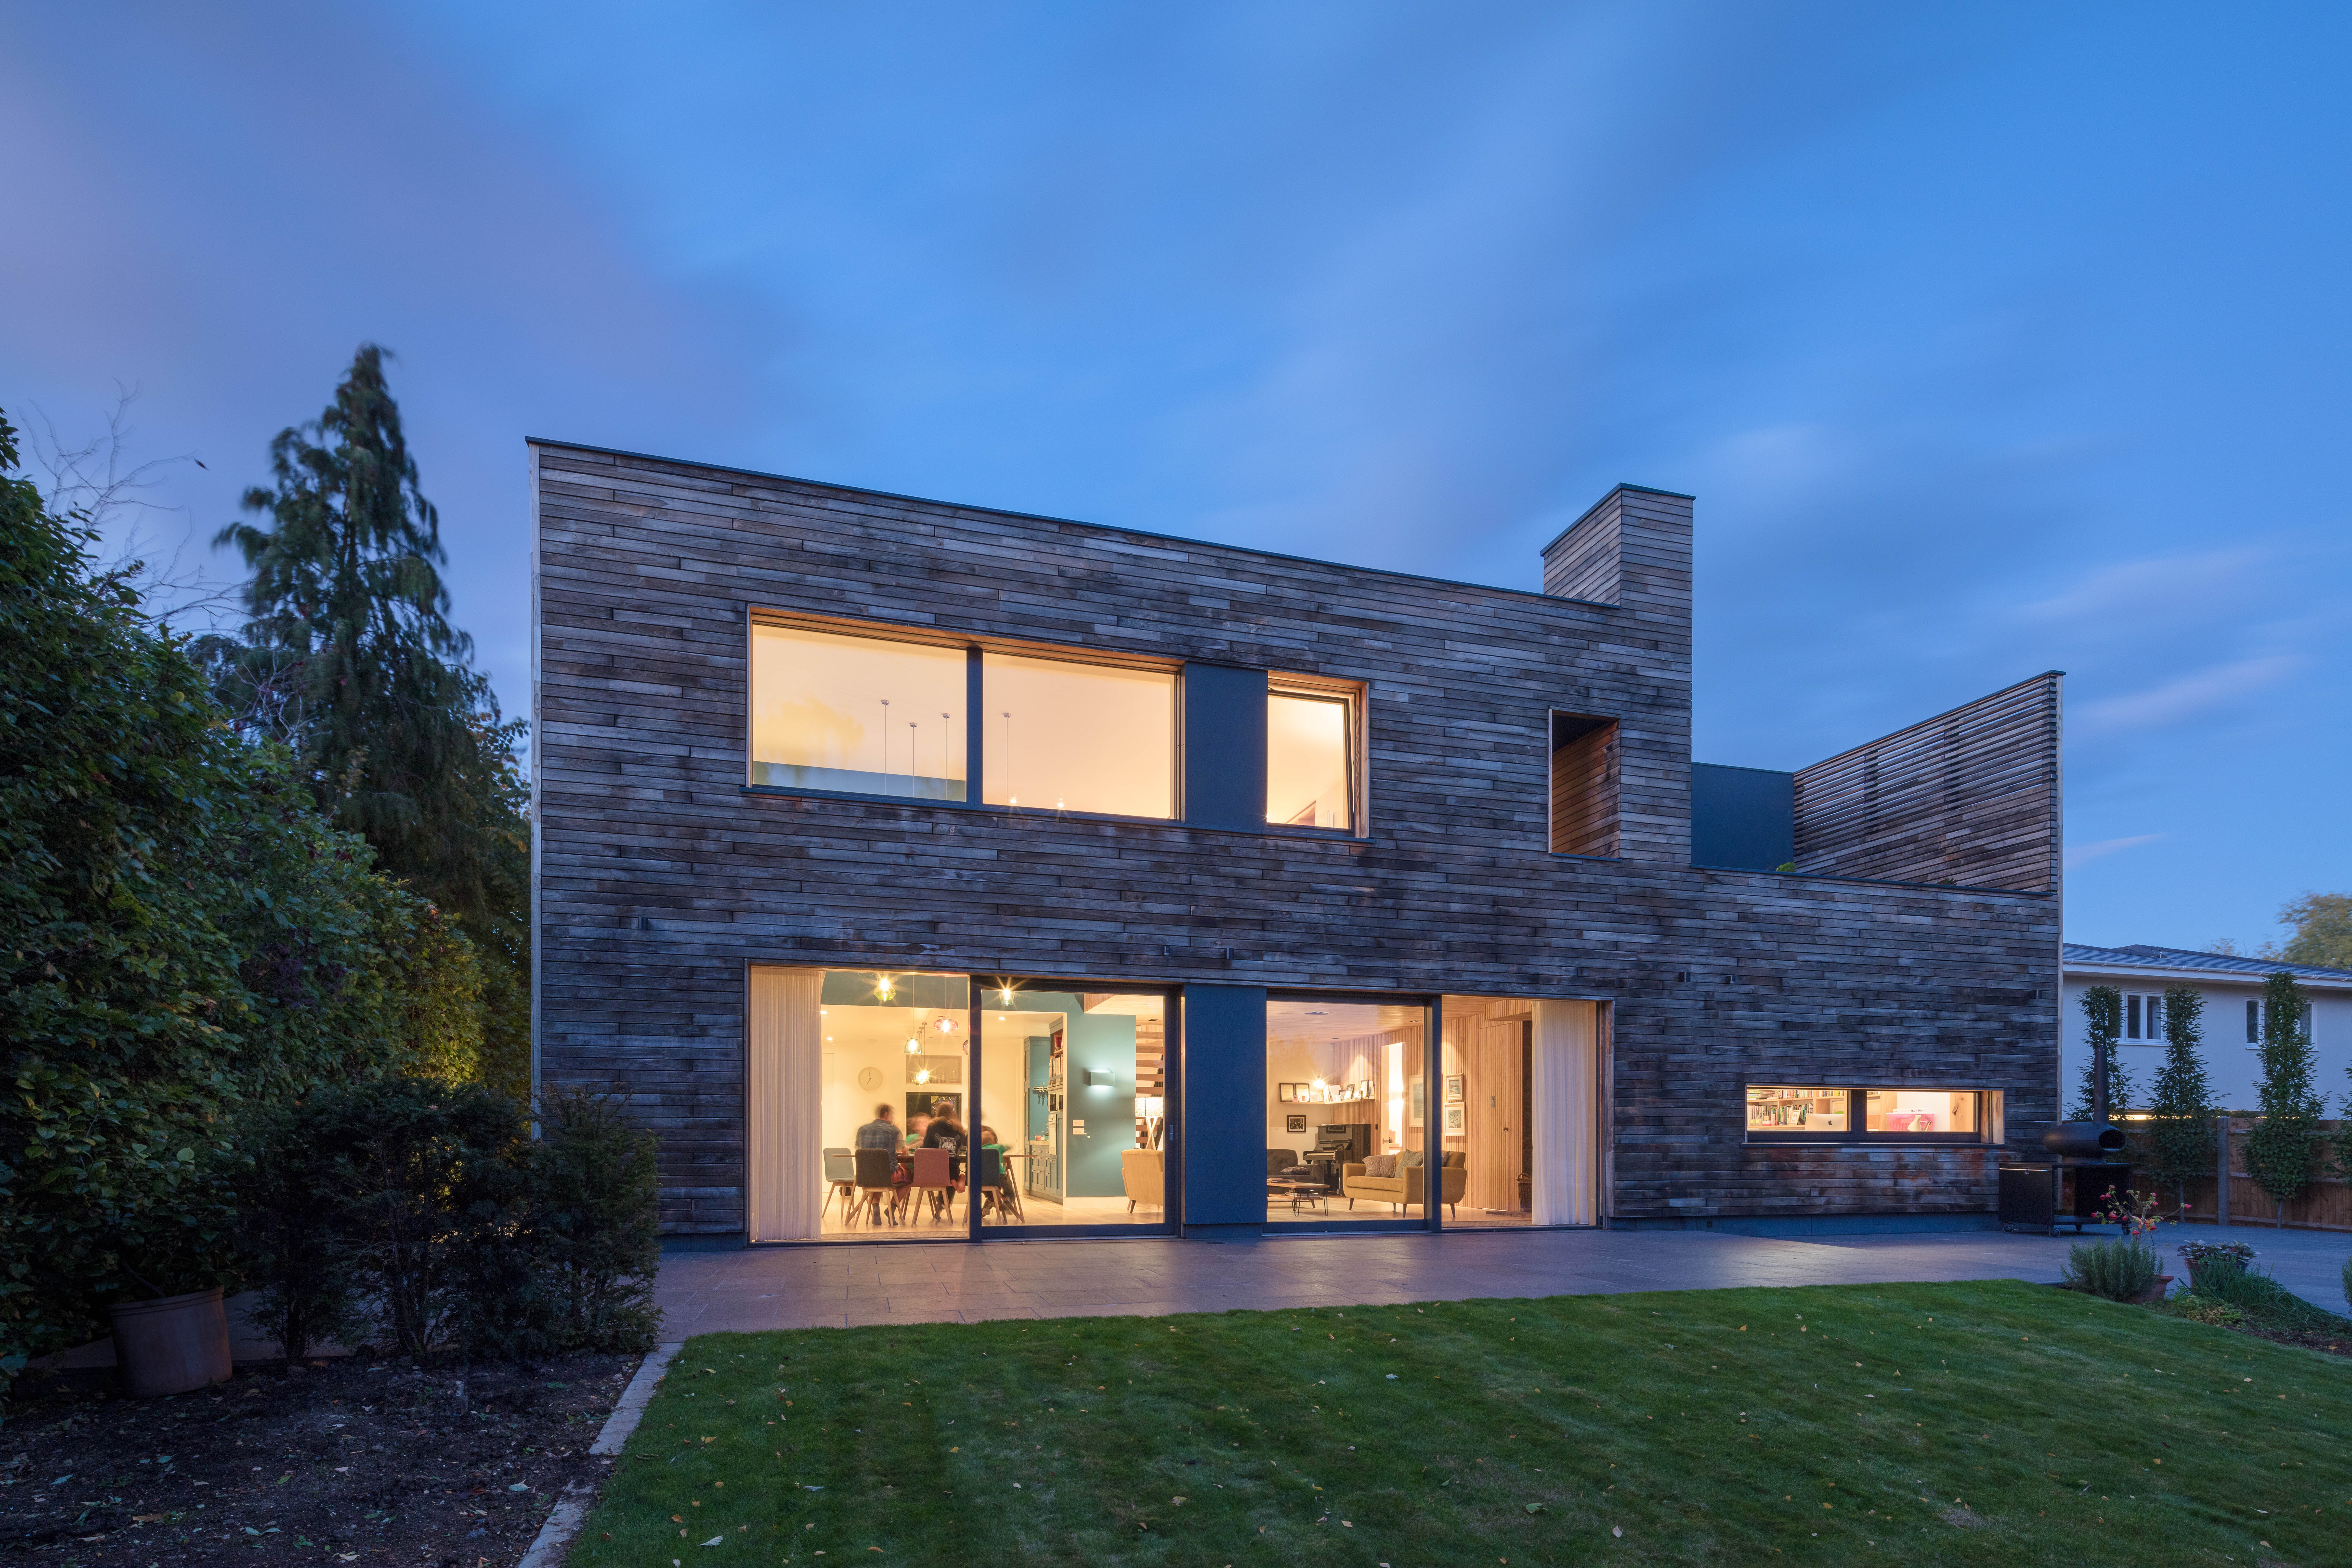 </p> <p>Find your ideal home design pro on designfor-me.com - get matched and see who's interested in your home project. Click image to see more inspiration from our design pros</p> <p>Design by Nicolas, architect from Central Bedfordshire, East of England</p> <p>#architecture #homedesign #modernhomes #homeinspiration #selfbuilds #selfbuildinspiration #selfbuildideas #granddesigns </p> <p>